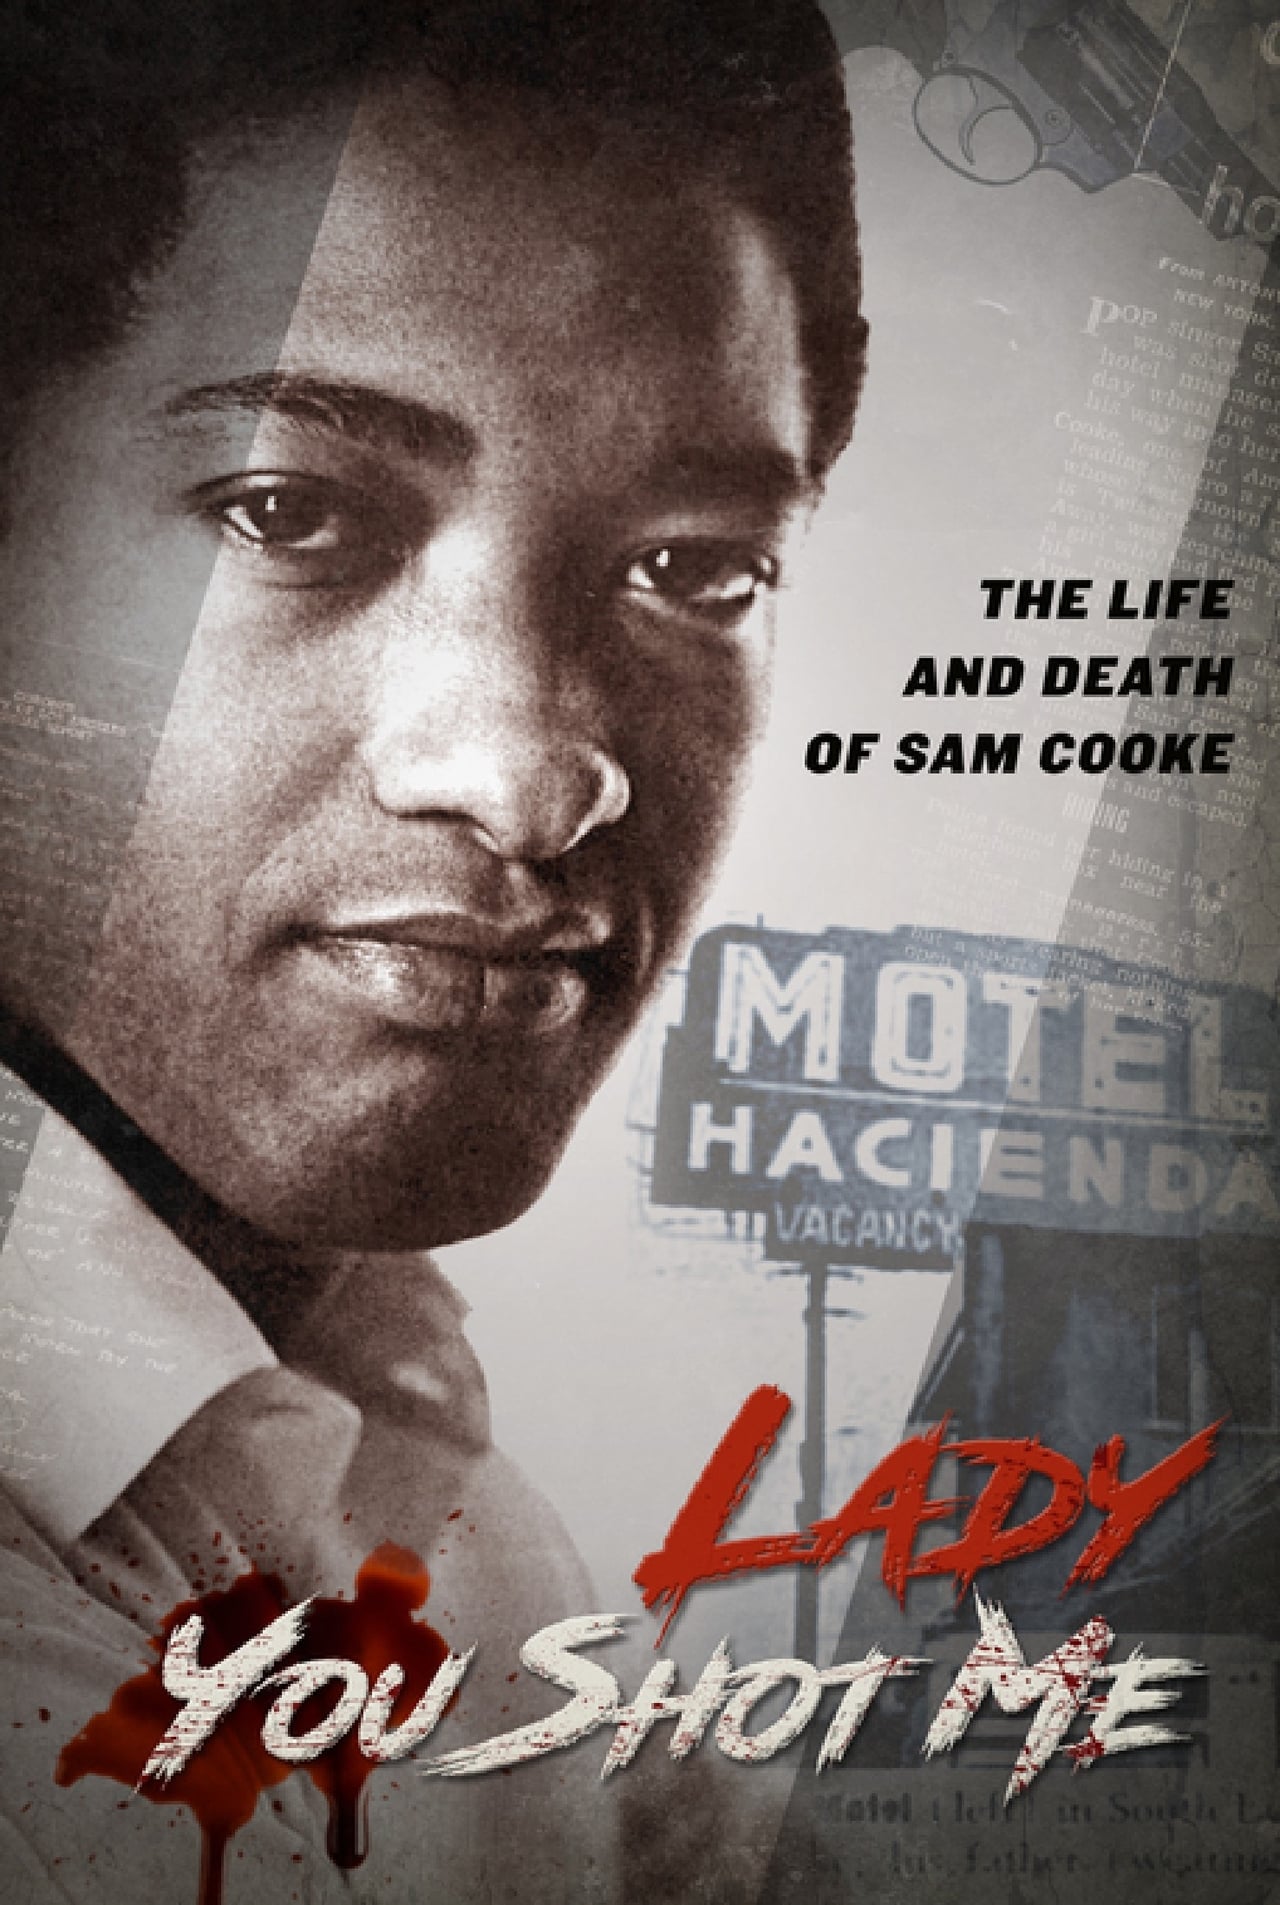 Lady, You Shot Me: The Life and Death of Sam Cooke